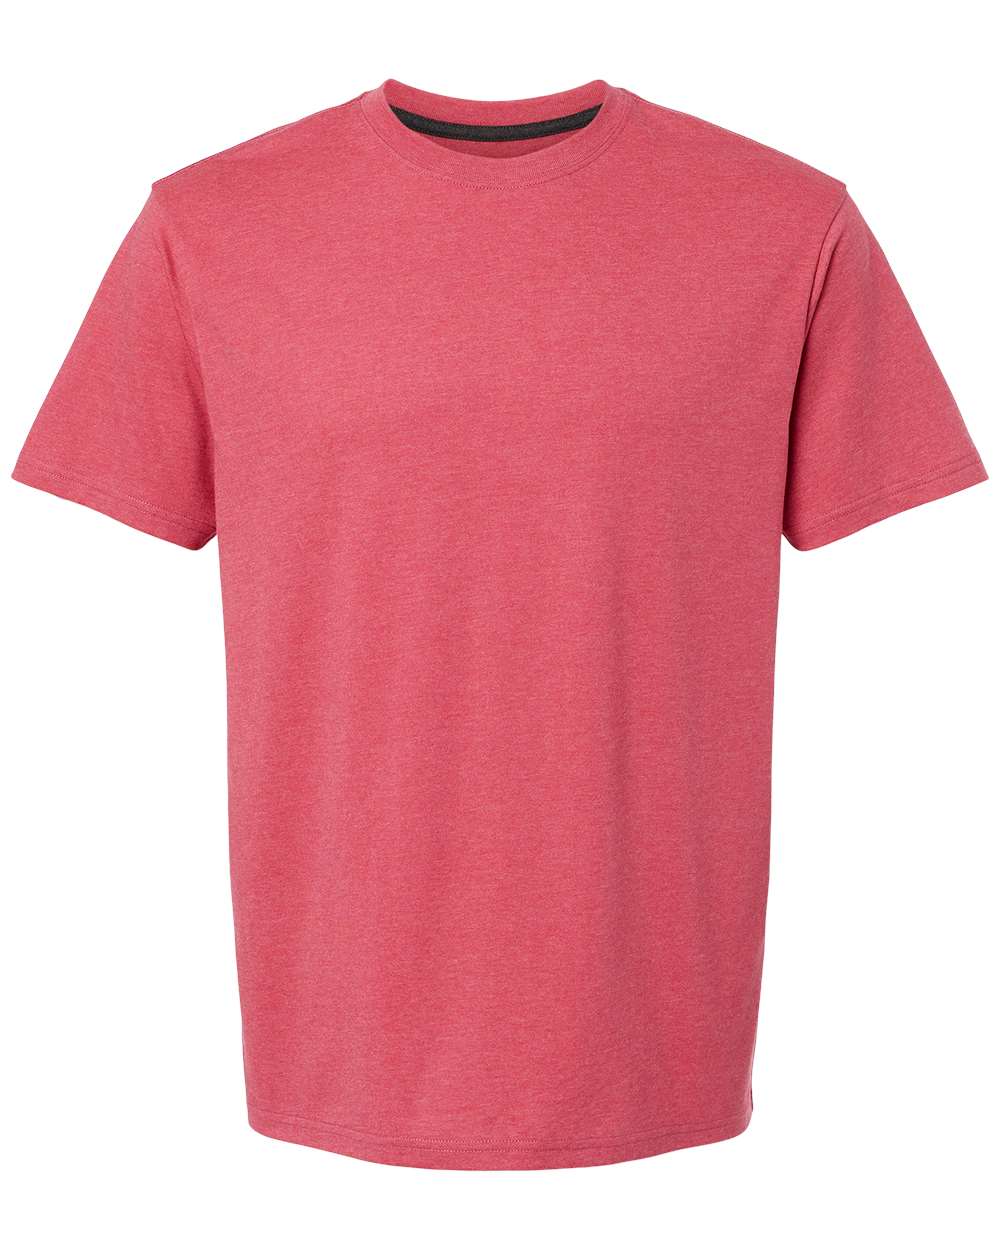 Customizable kastlfel recycledsoft t-shirt in red